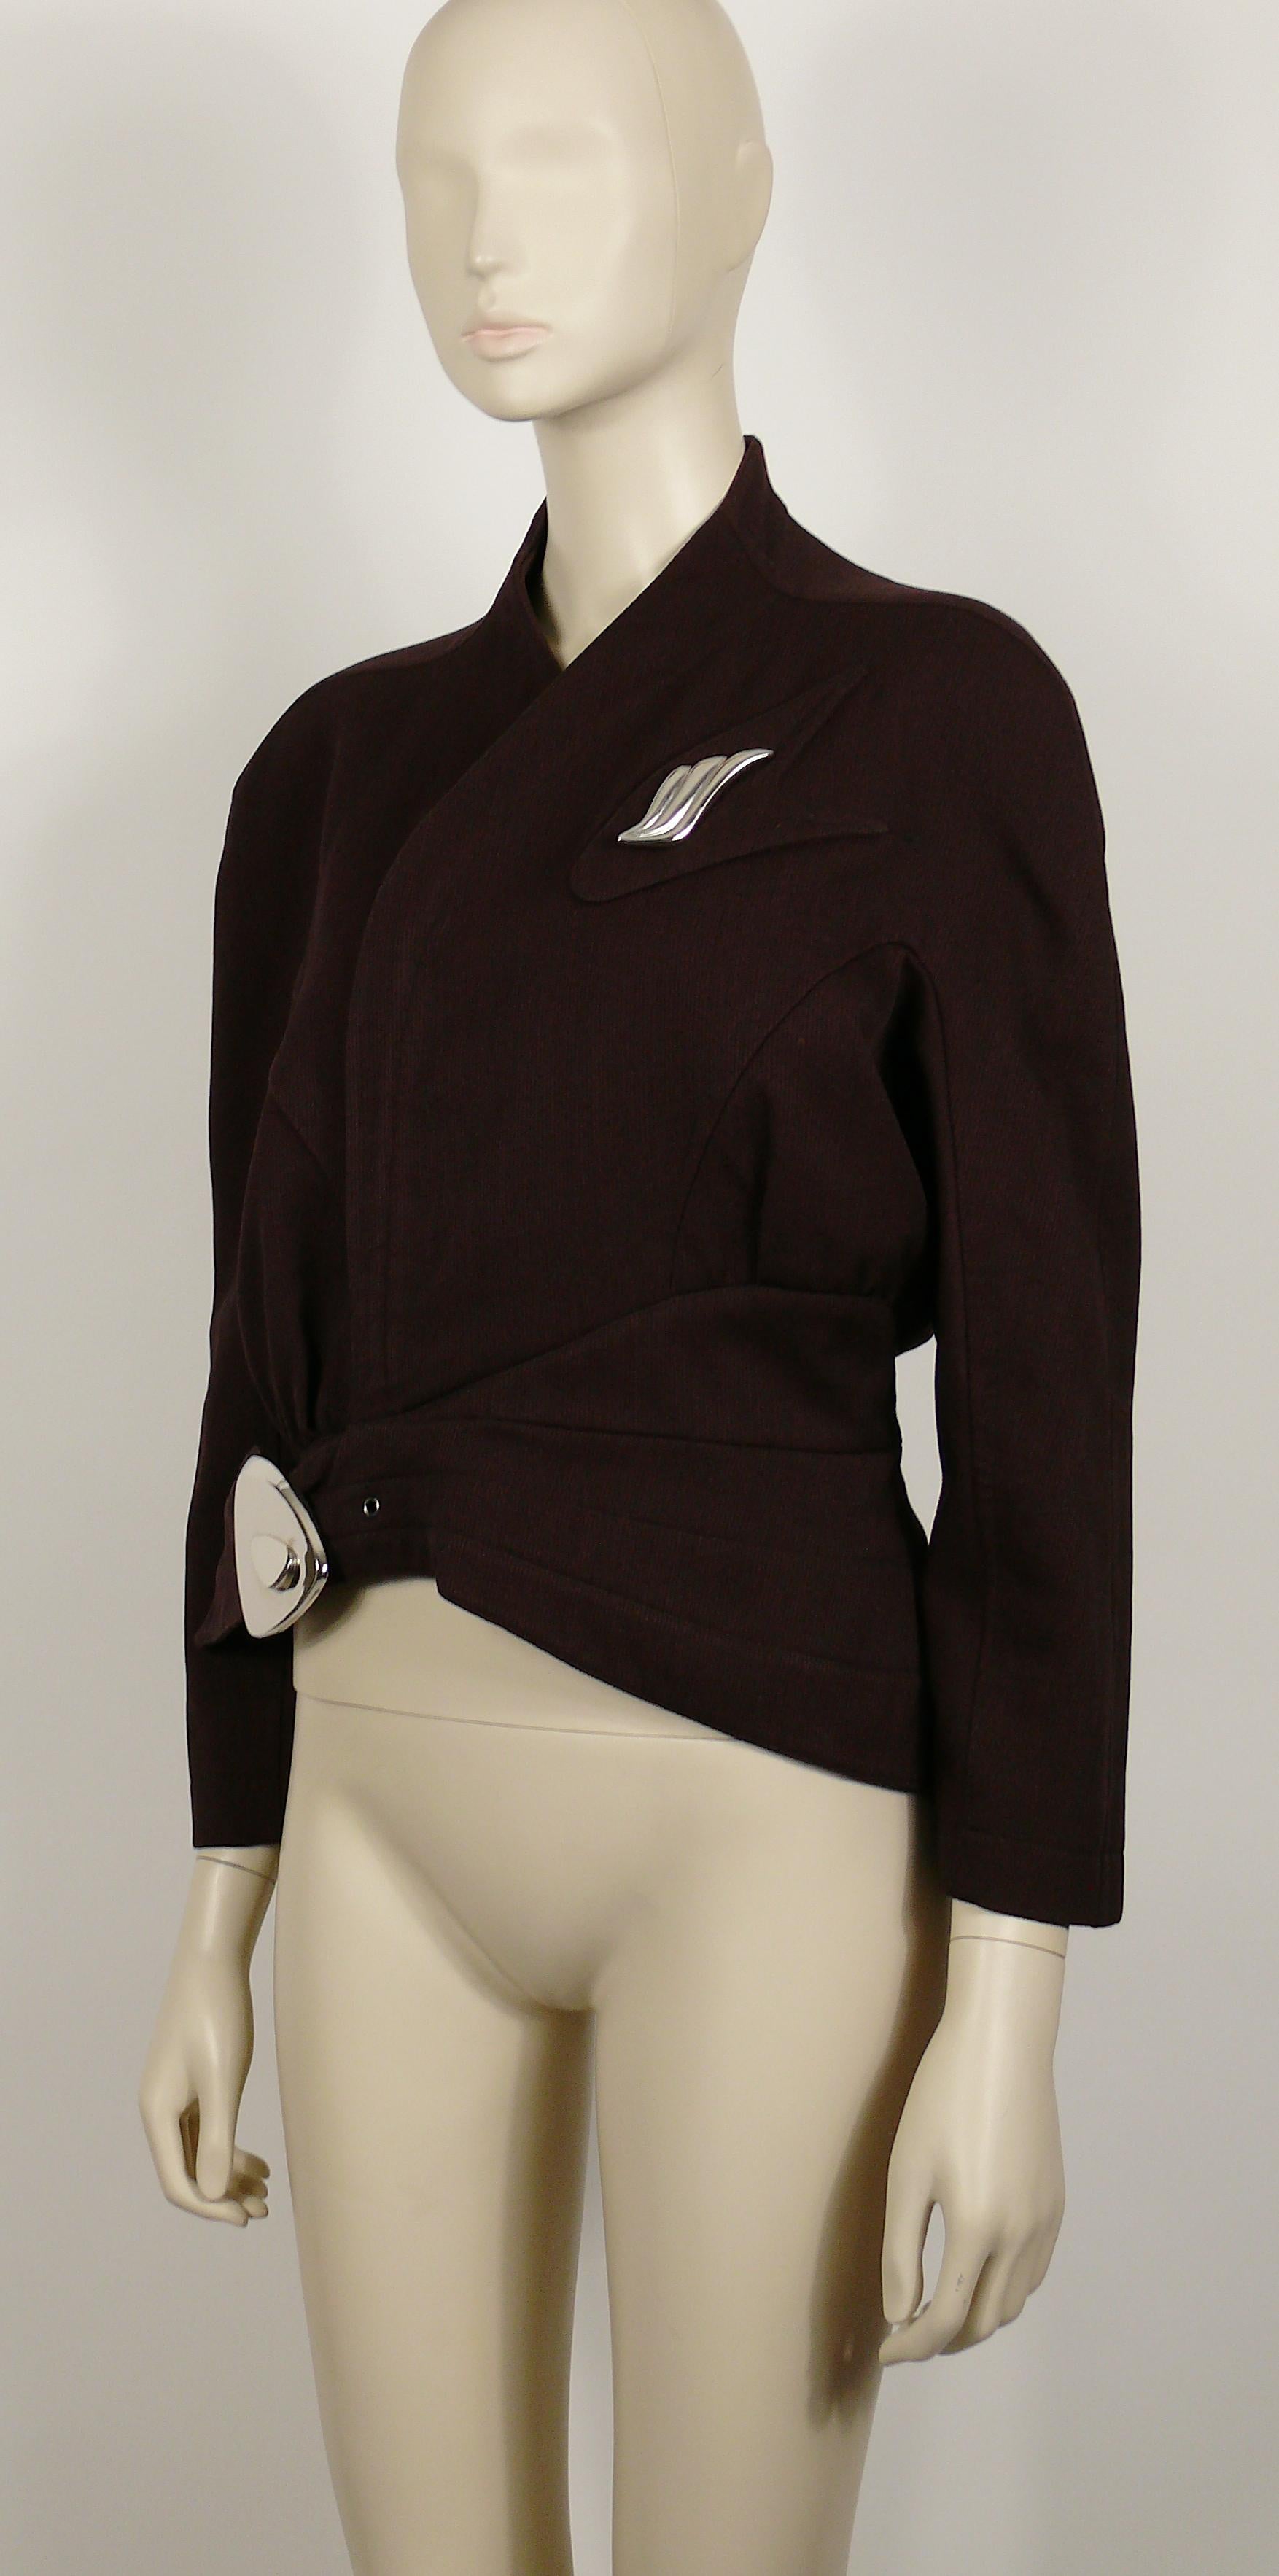 Thierry Mugler Vintage Plum Asymmetrical Iconic Supple Jacket In Excellent Condition For Sale In Nice, FR